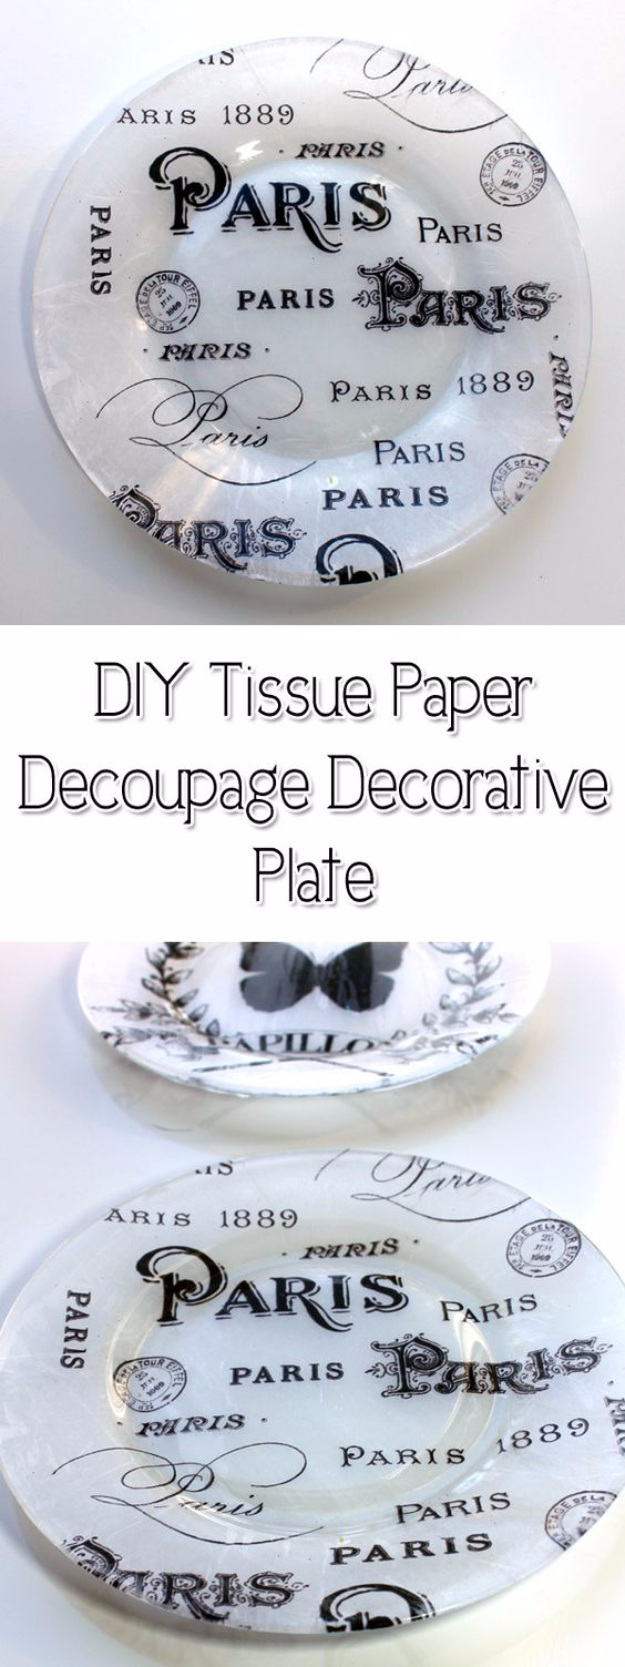 16 Amazing DIY Ideas From Old Dishes That You Can Easily Make